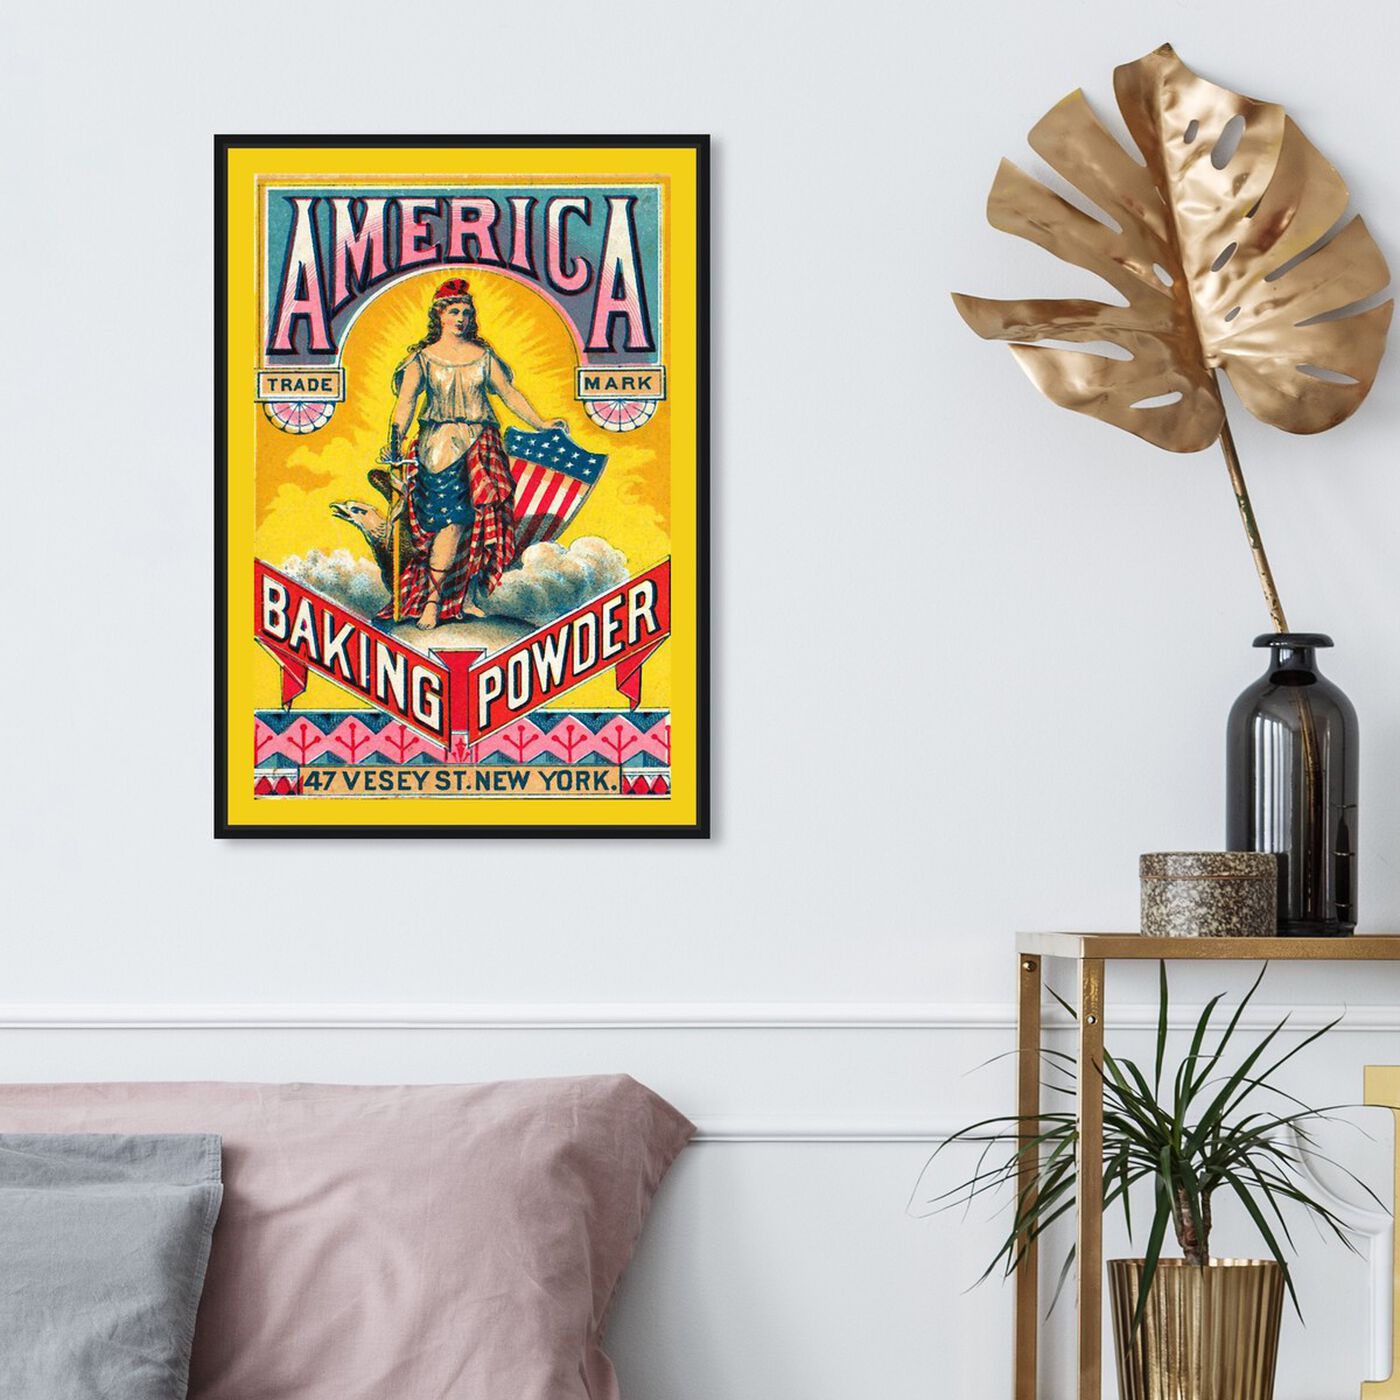 Hanging view of America Baking Powder featuring advertising and promotional brands art.